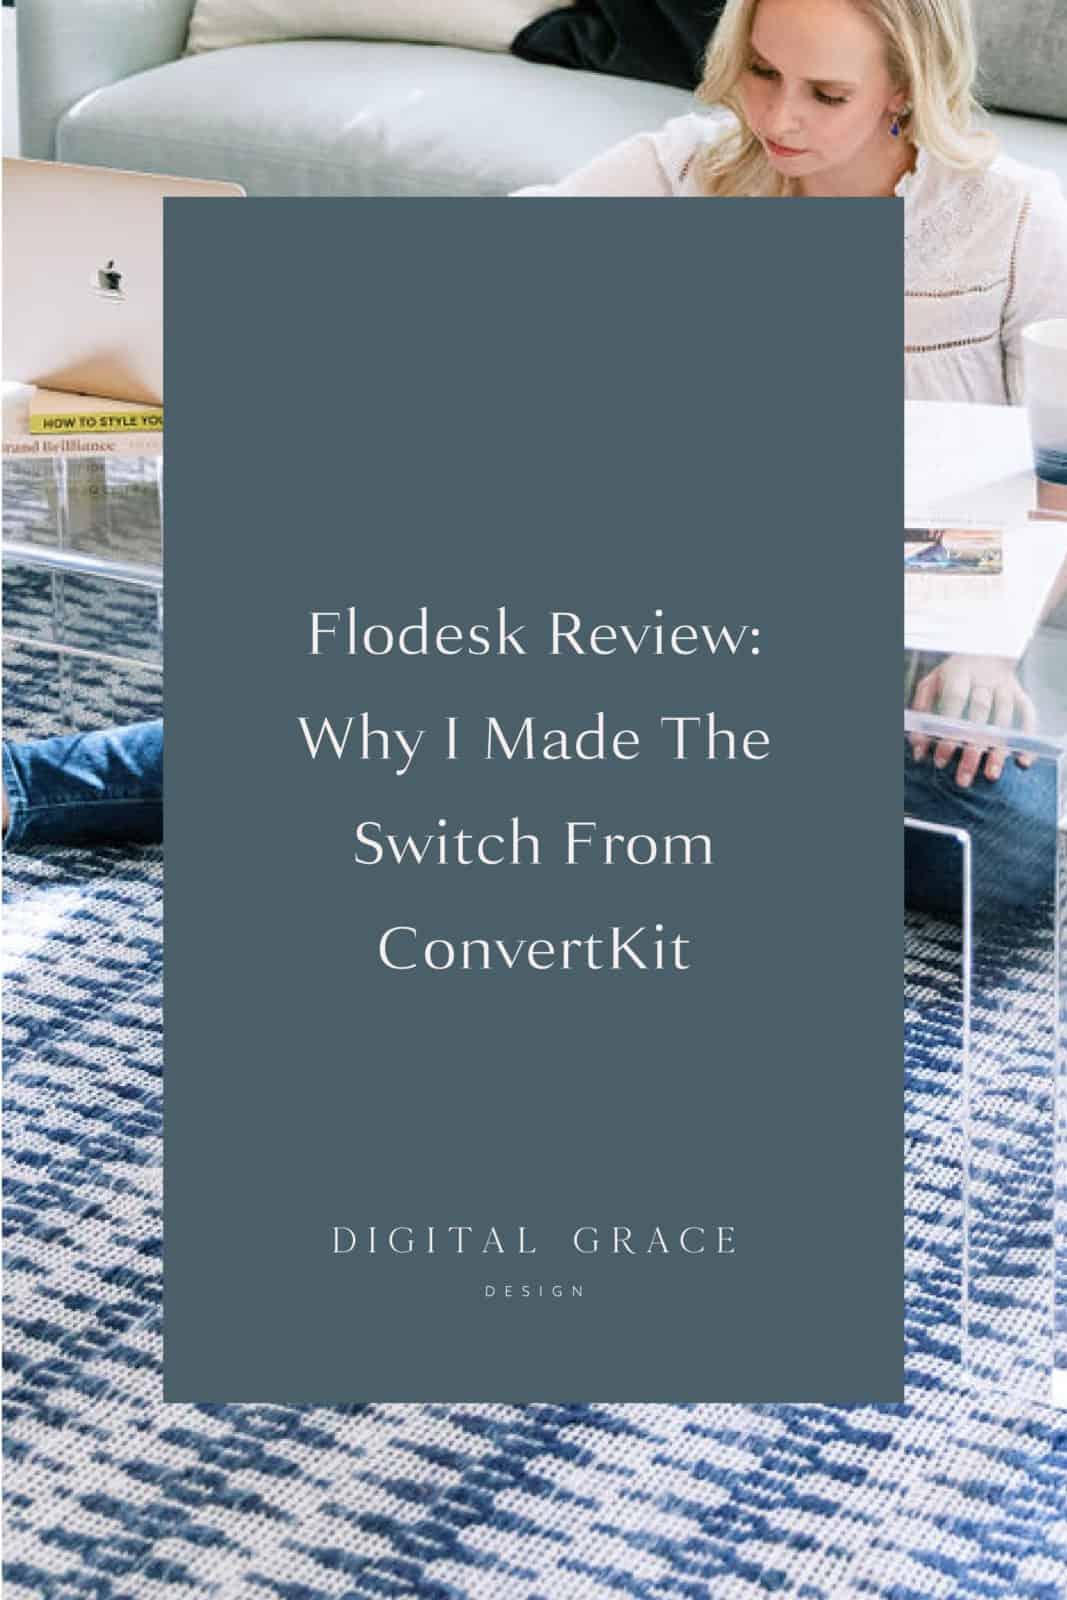 Why I Switched From ConvertKit to Flodesk